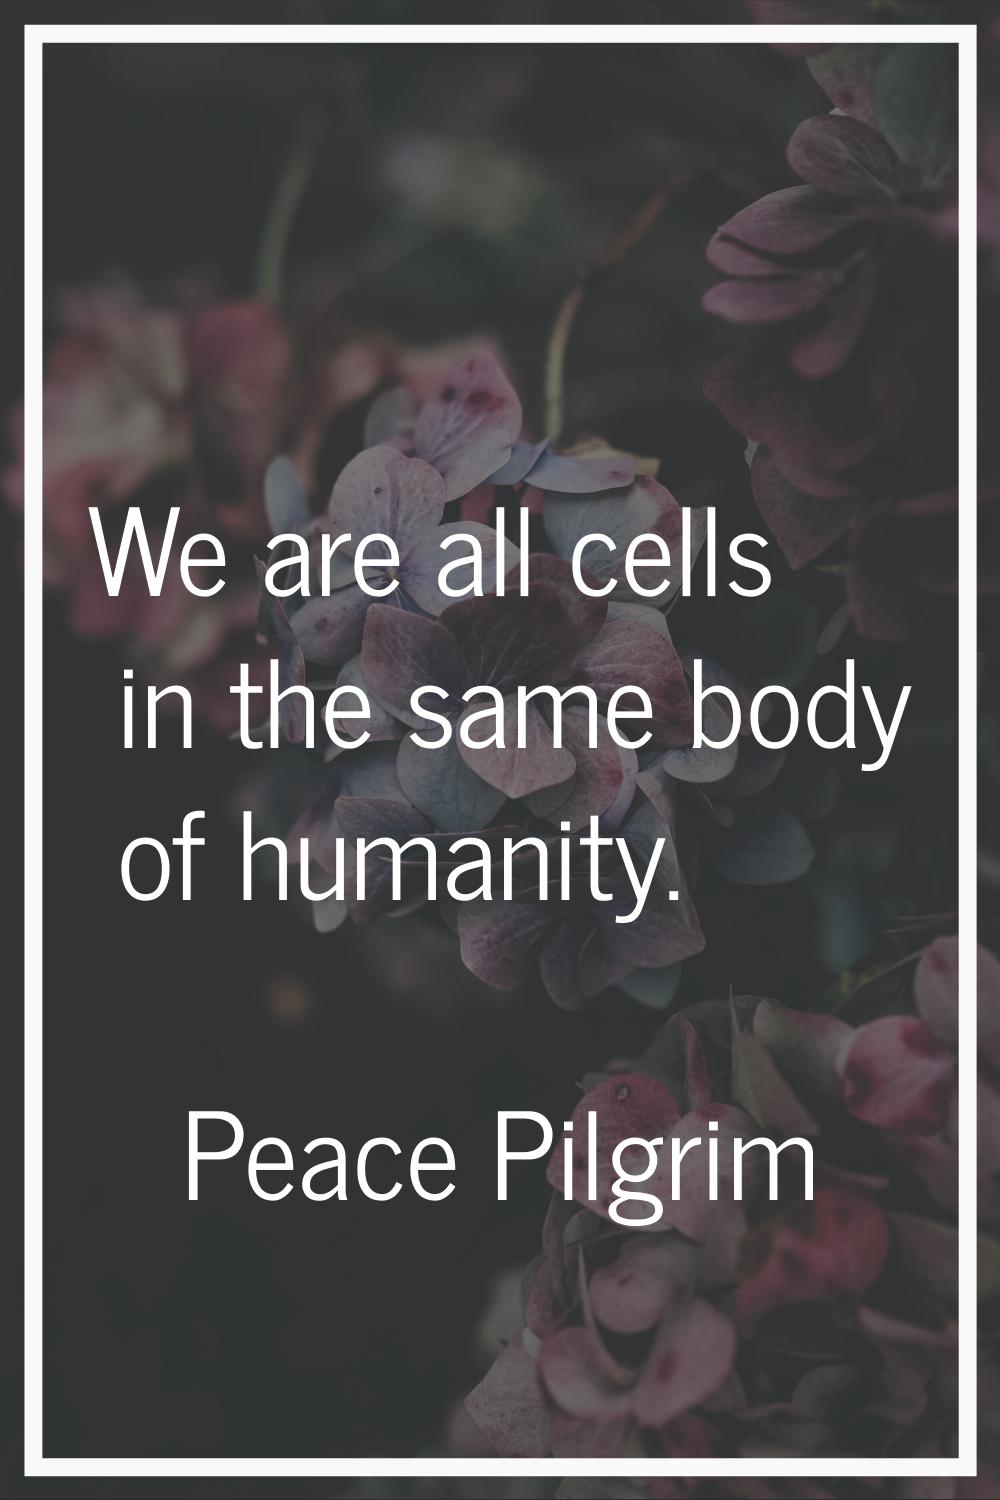 We are all cells in the same body of humanity.